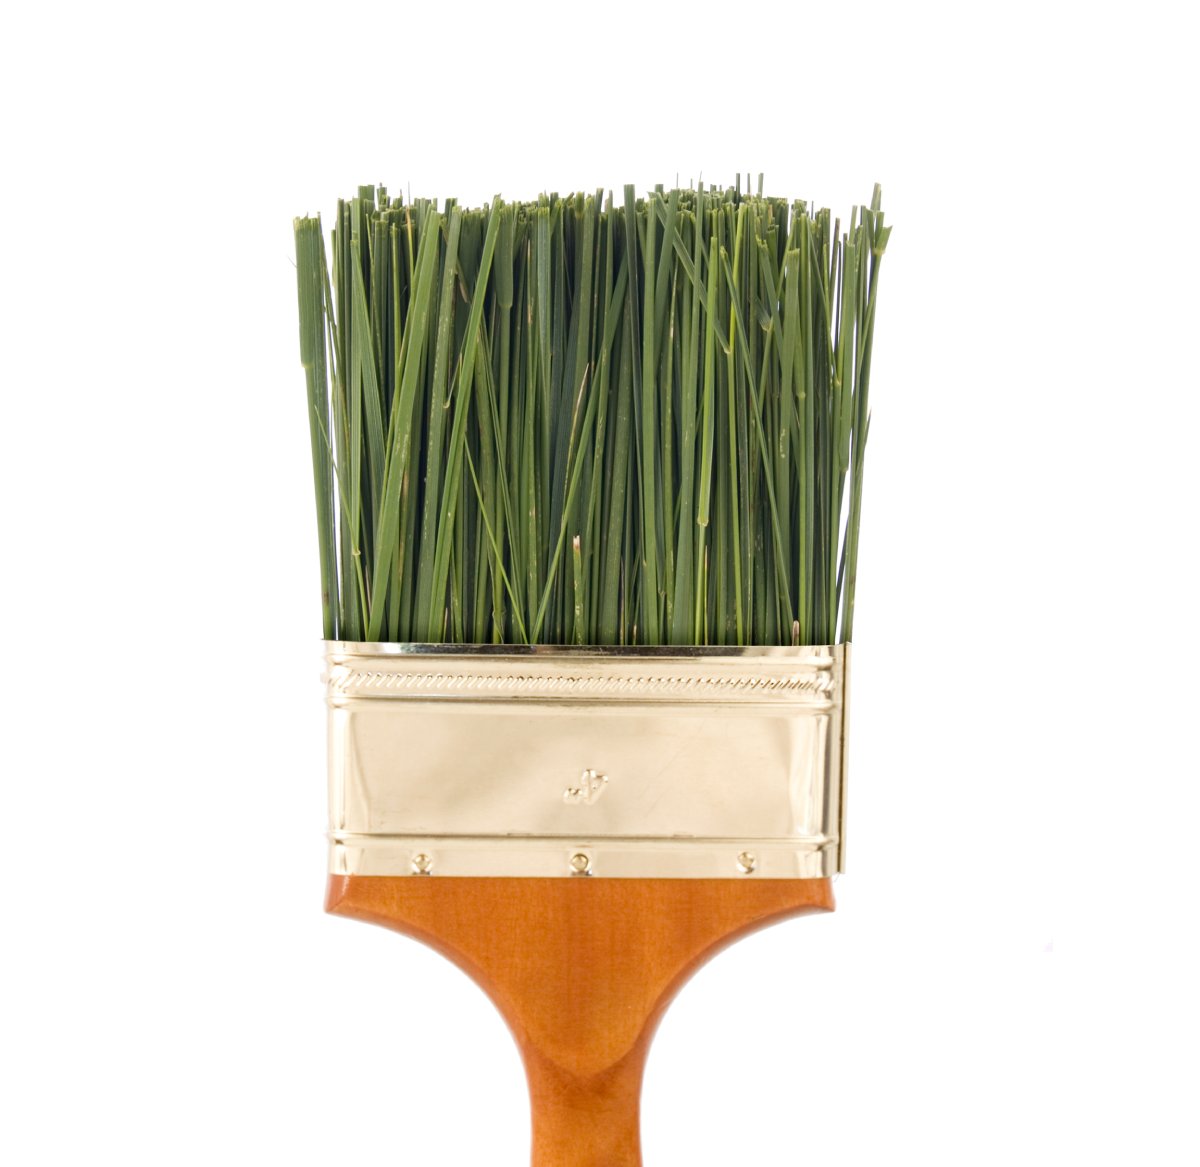 Green-grass-as bristles- in-a-four-inch-paint-brush